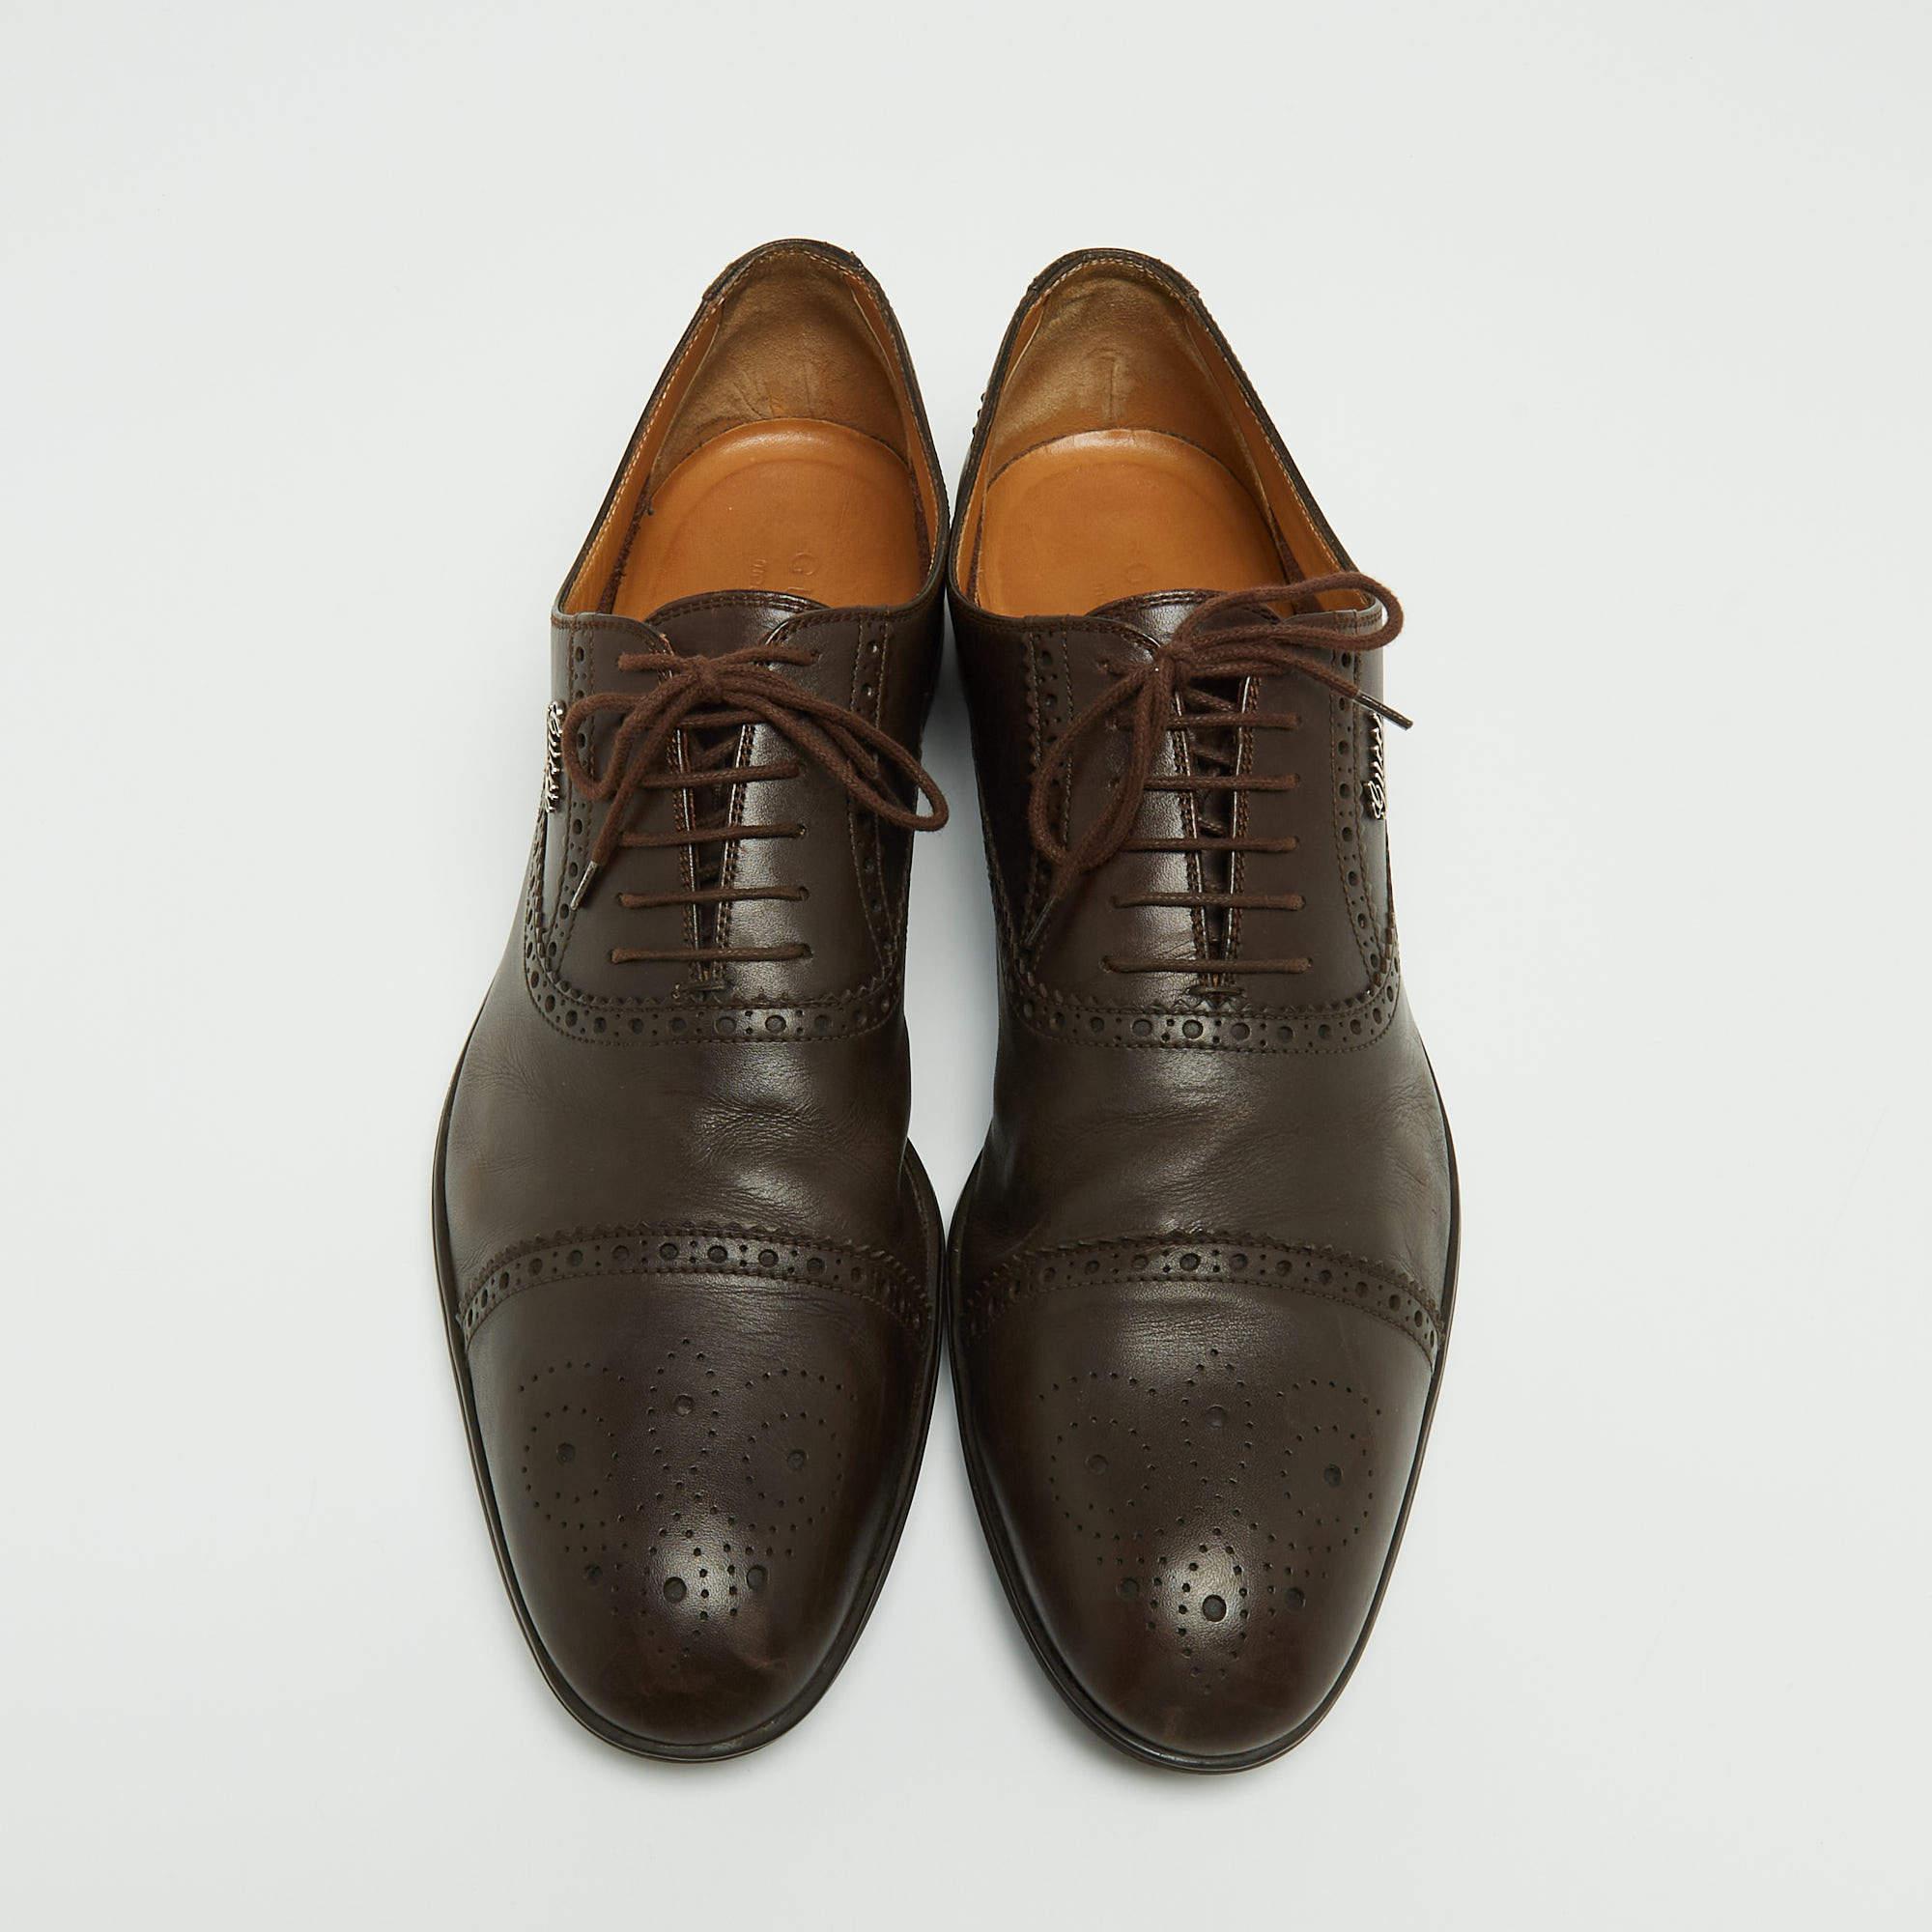 Let comfort and classic style be yours with these designer oxfords from Gucci. Crafted with skill, the high-quality shoes have the perfect construction to take you through the day with utmost ease.

